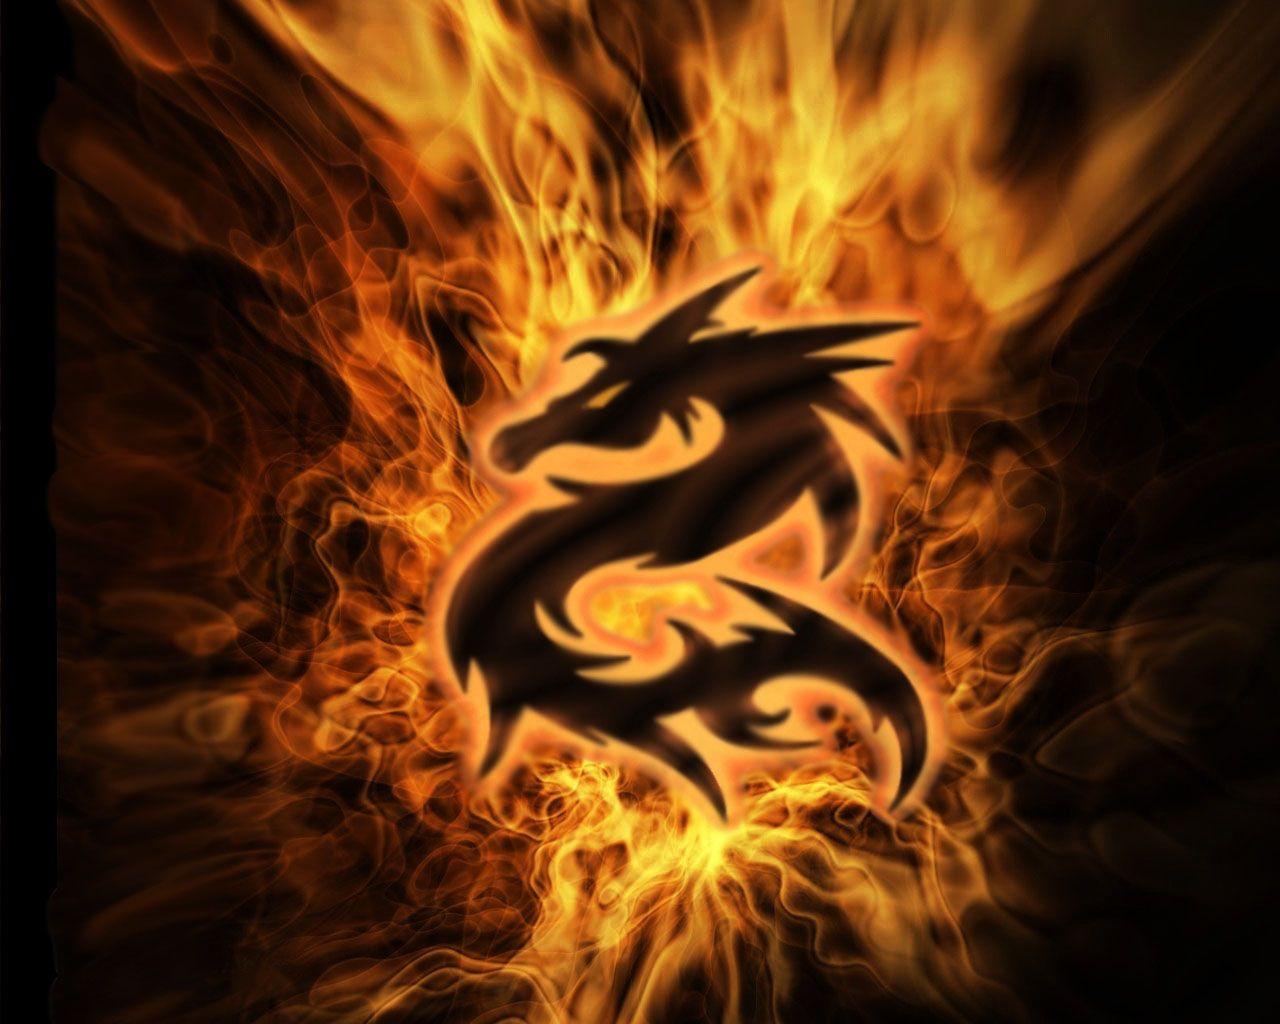 best Cool fire and flame picture image. Fire